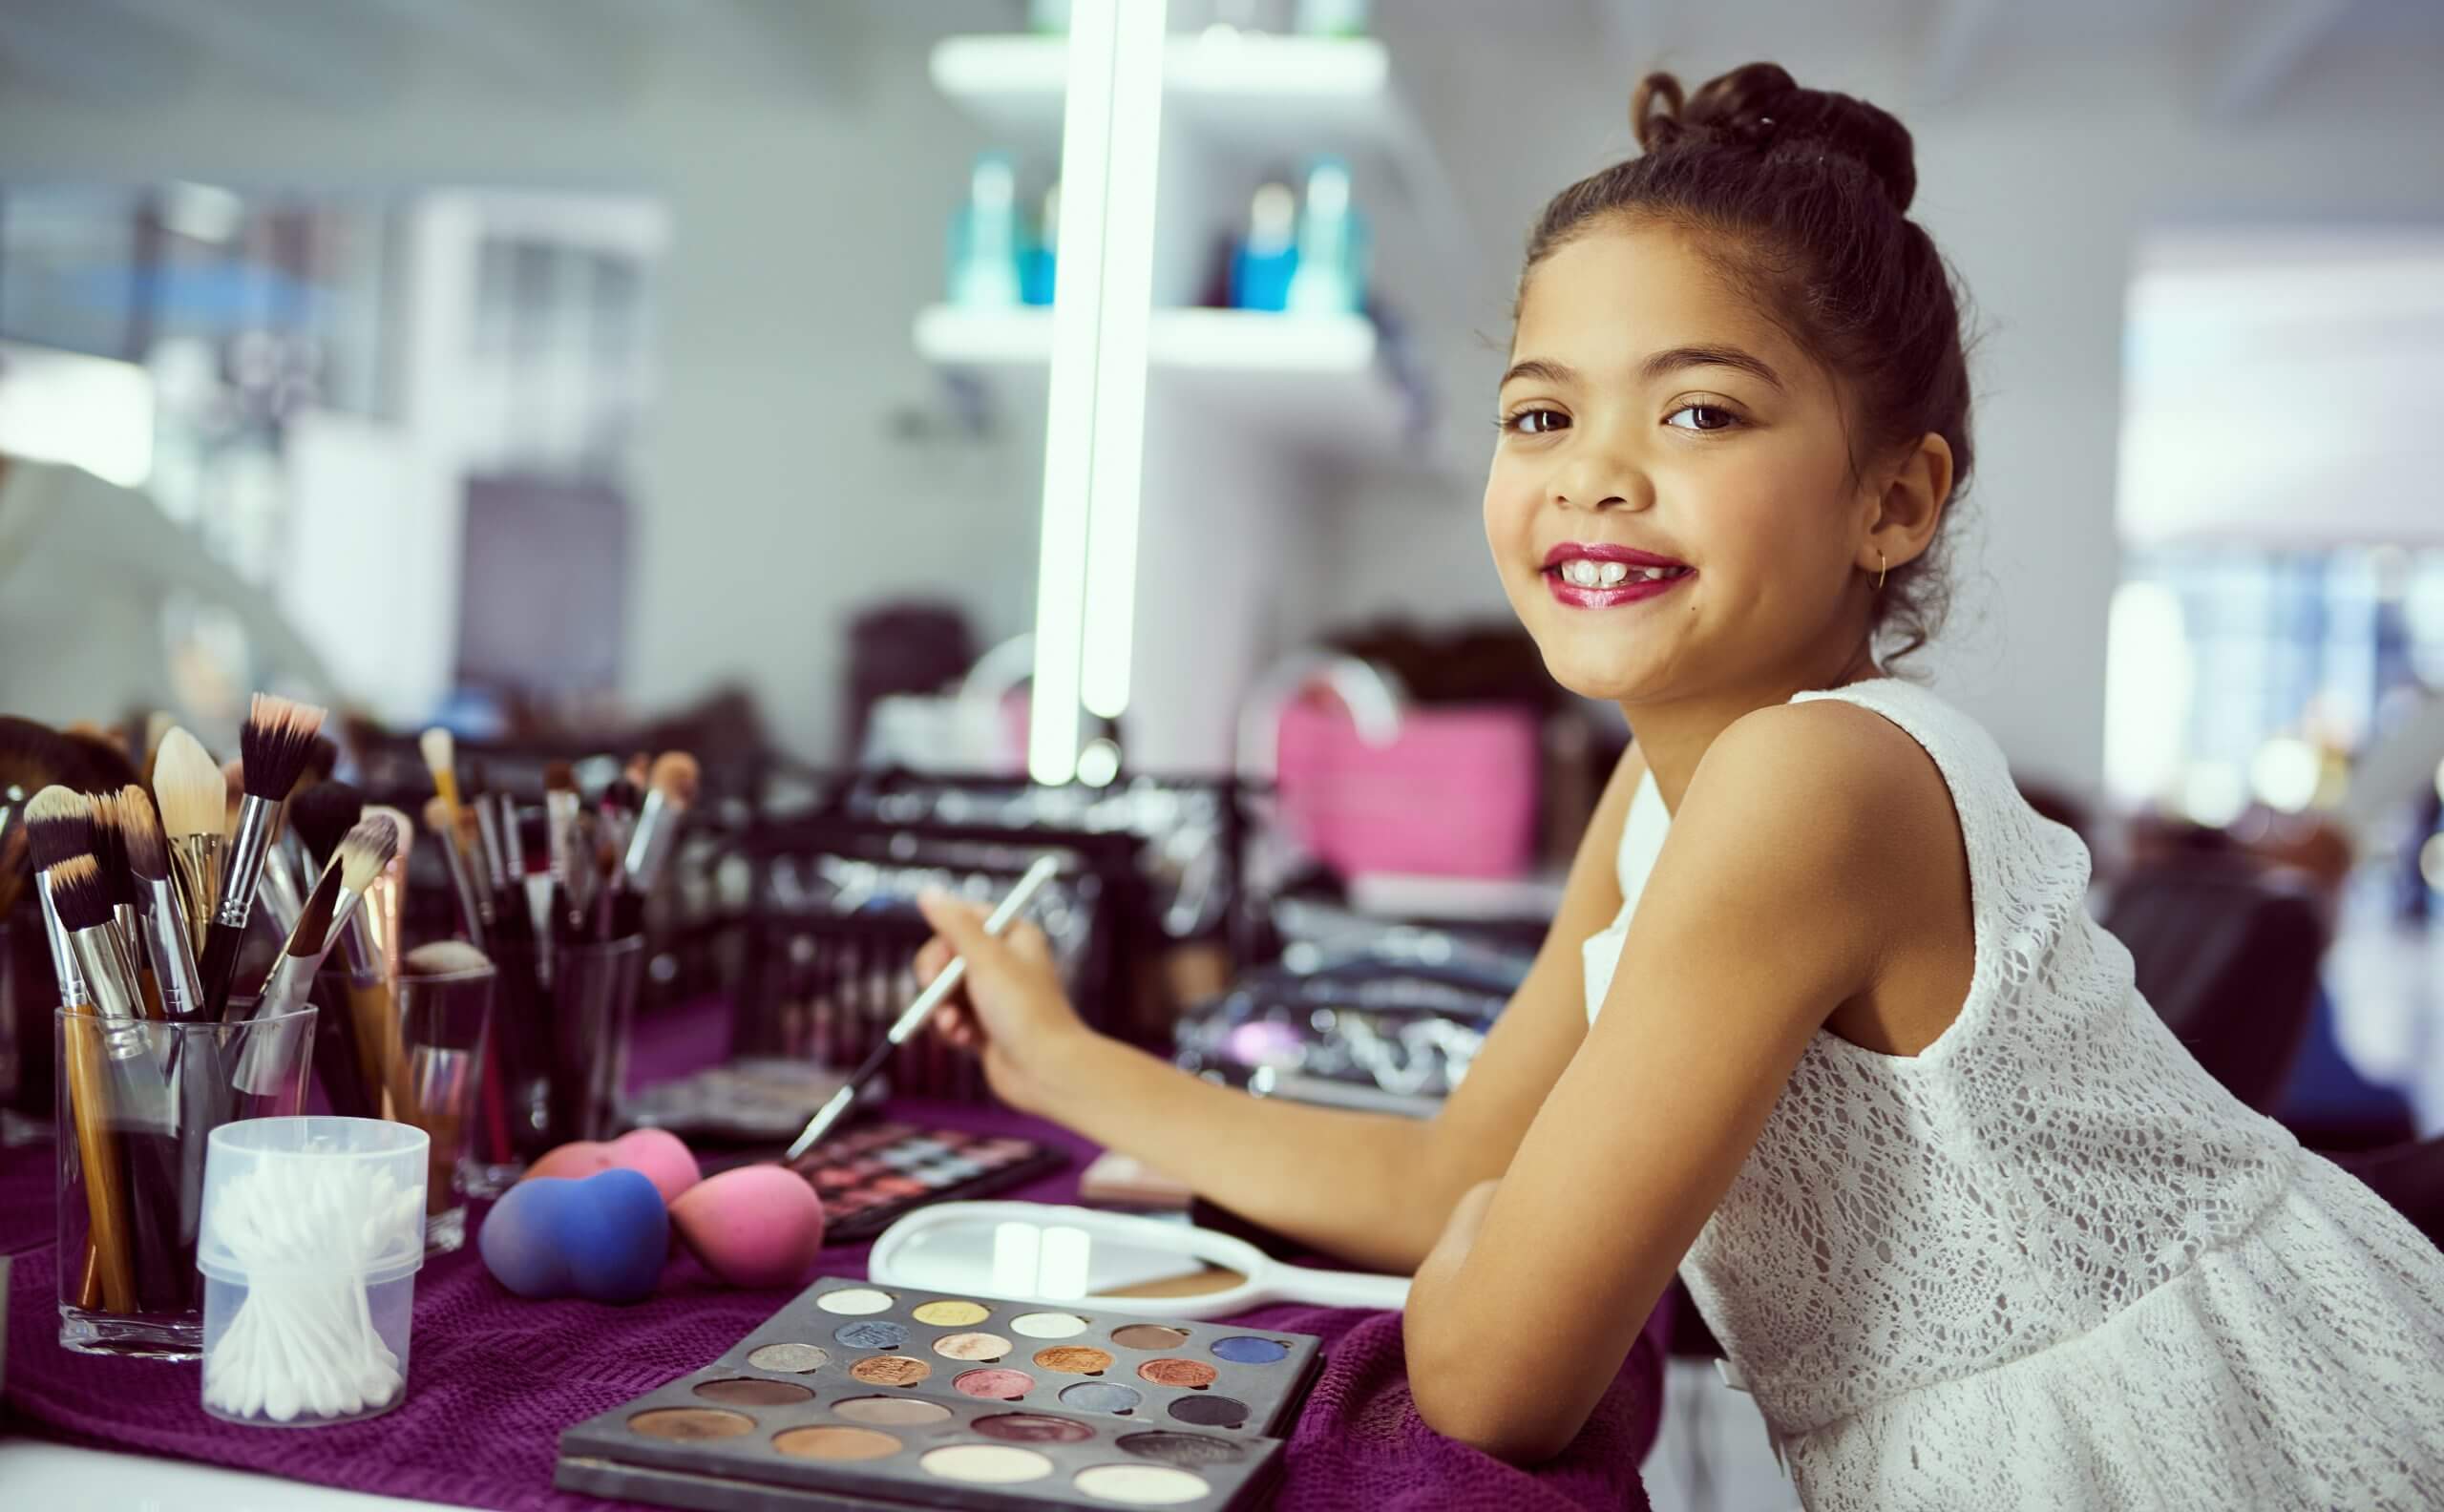 Pageant Child standing at a makeup table smiling at the camera. She is wearing makeup with her hair up and a pretty white dress on.